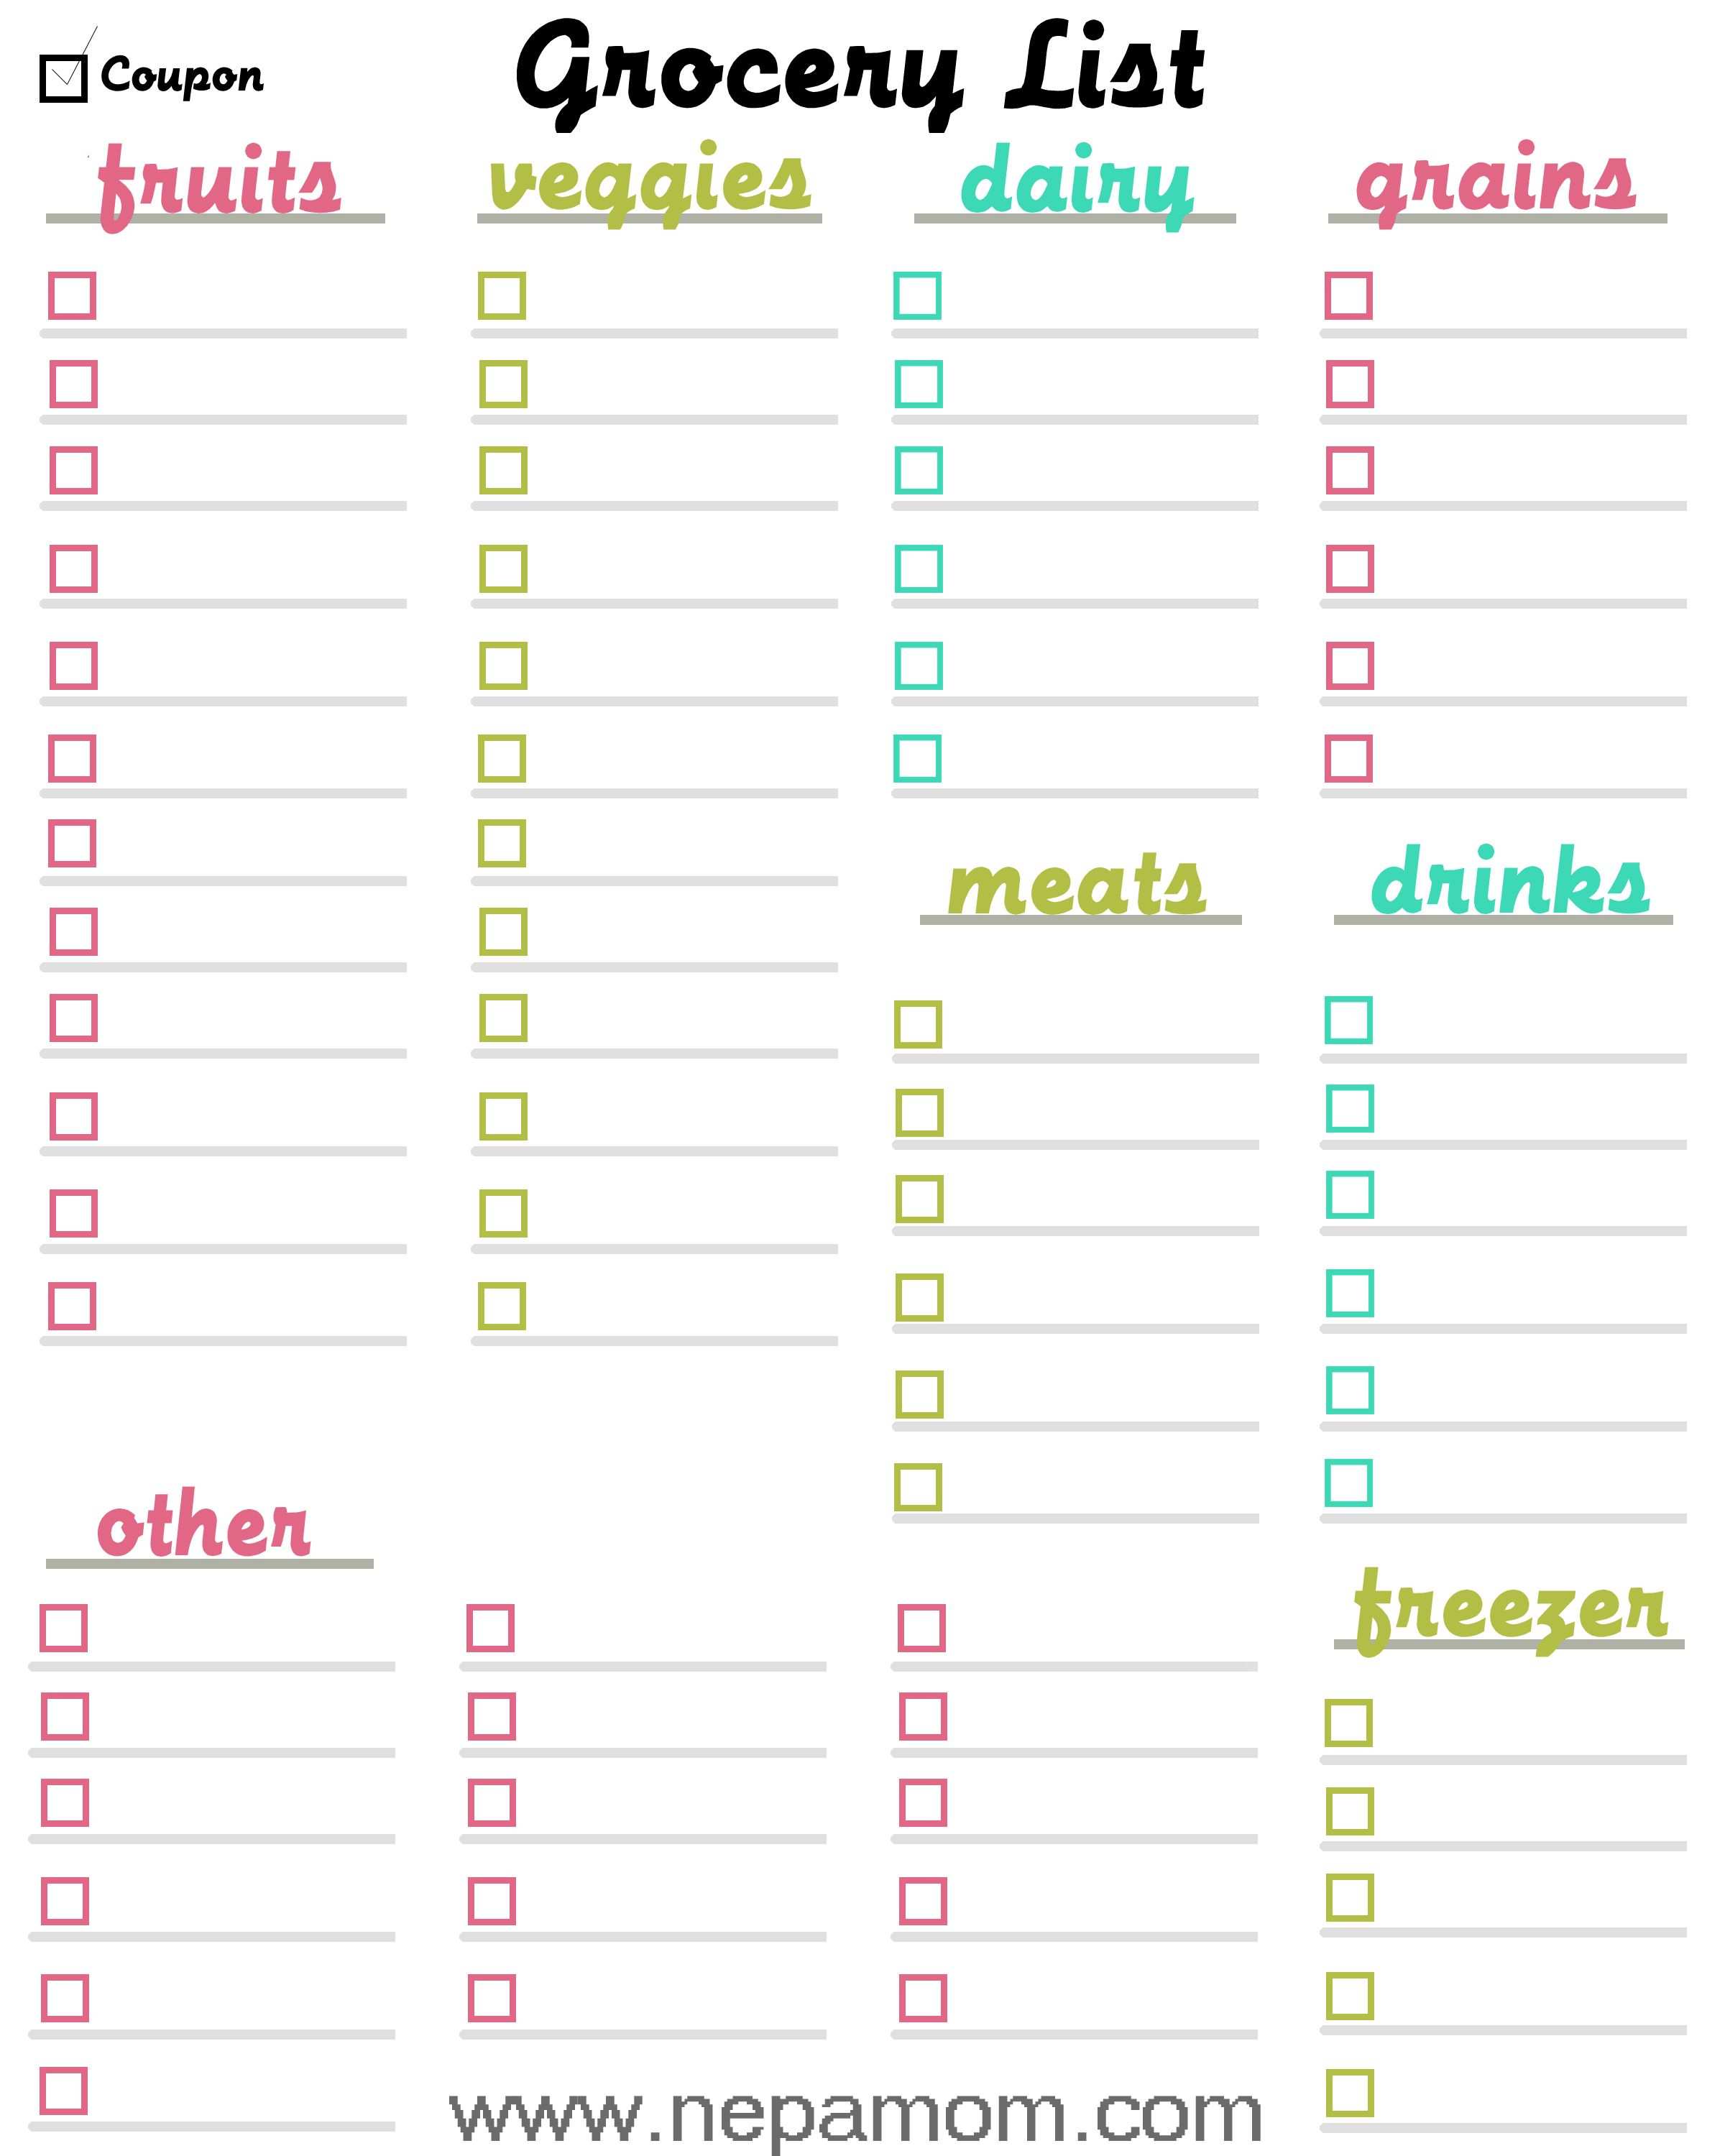 Grocery Shopping List Template Print This Template Out And Save Money And Time At The Grocery Store Grocery Shopping List Template Printable Grocery List Template Grocery List Template